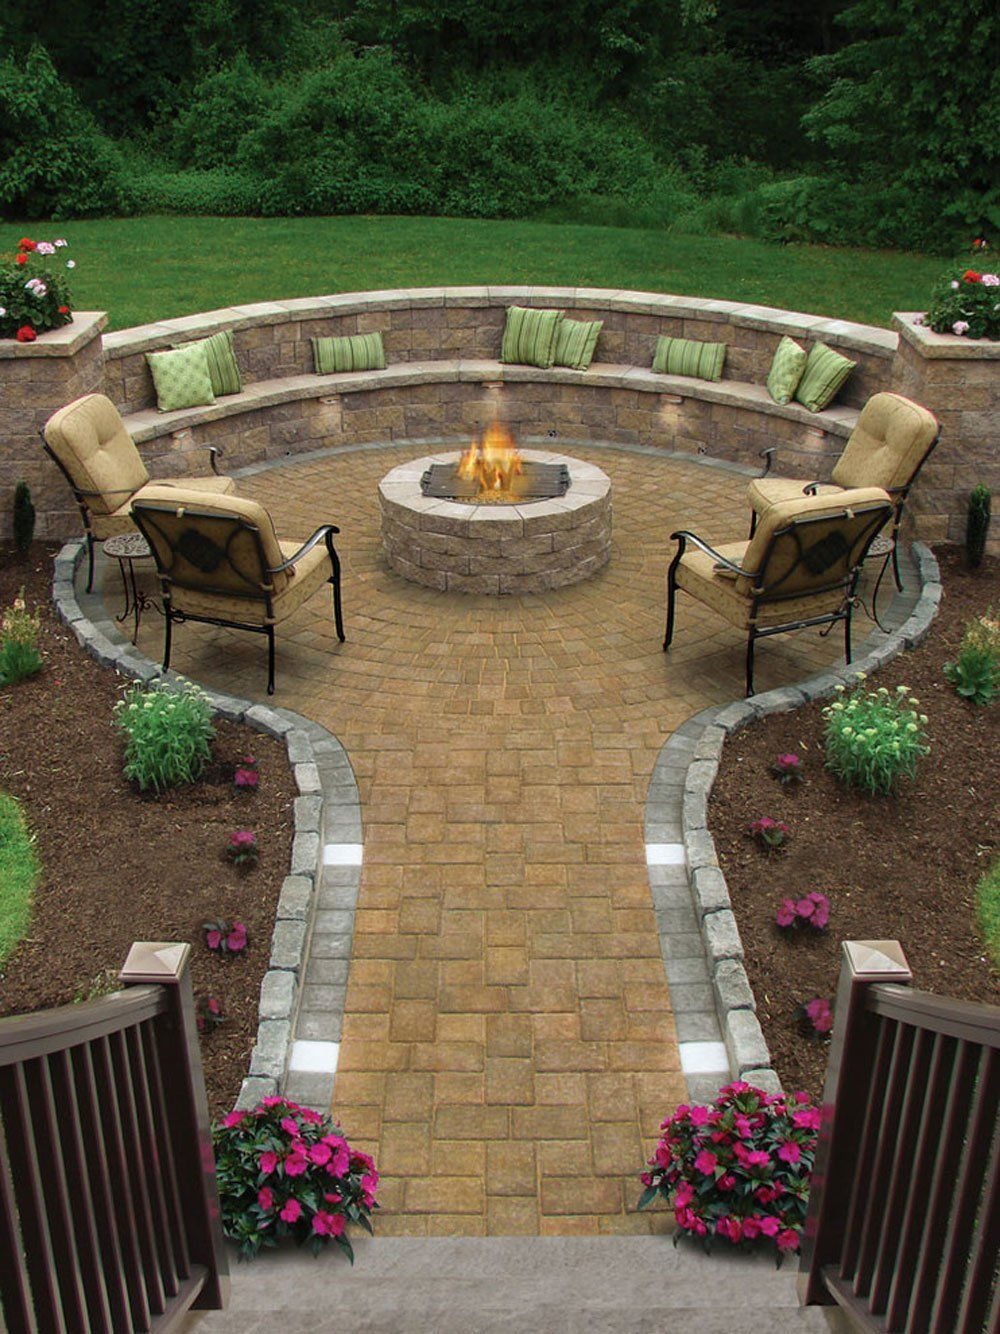 17 Of The Most Amazing Seating Area Around The Fire Pit Ever within proportions 1000 X 1334